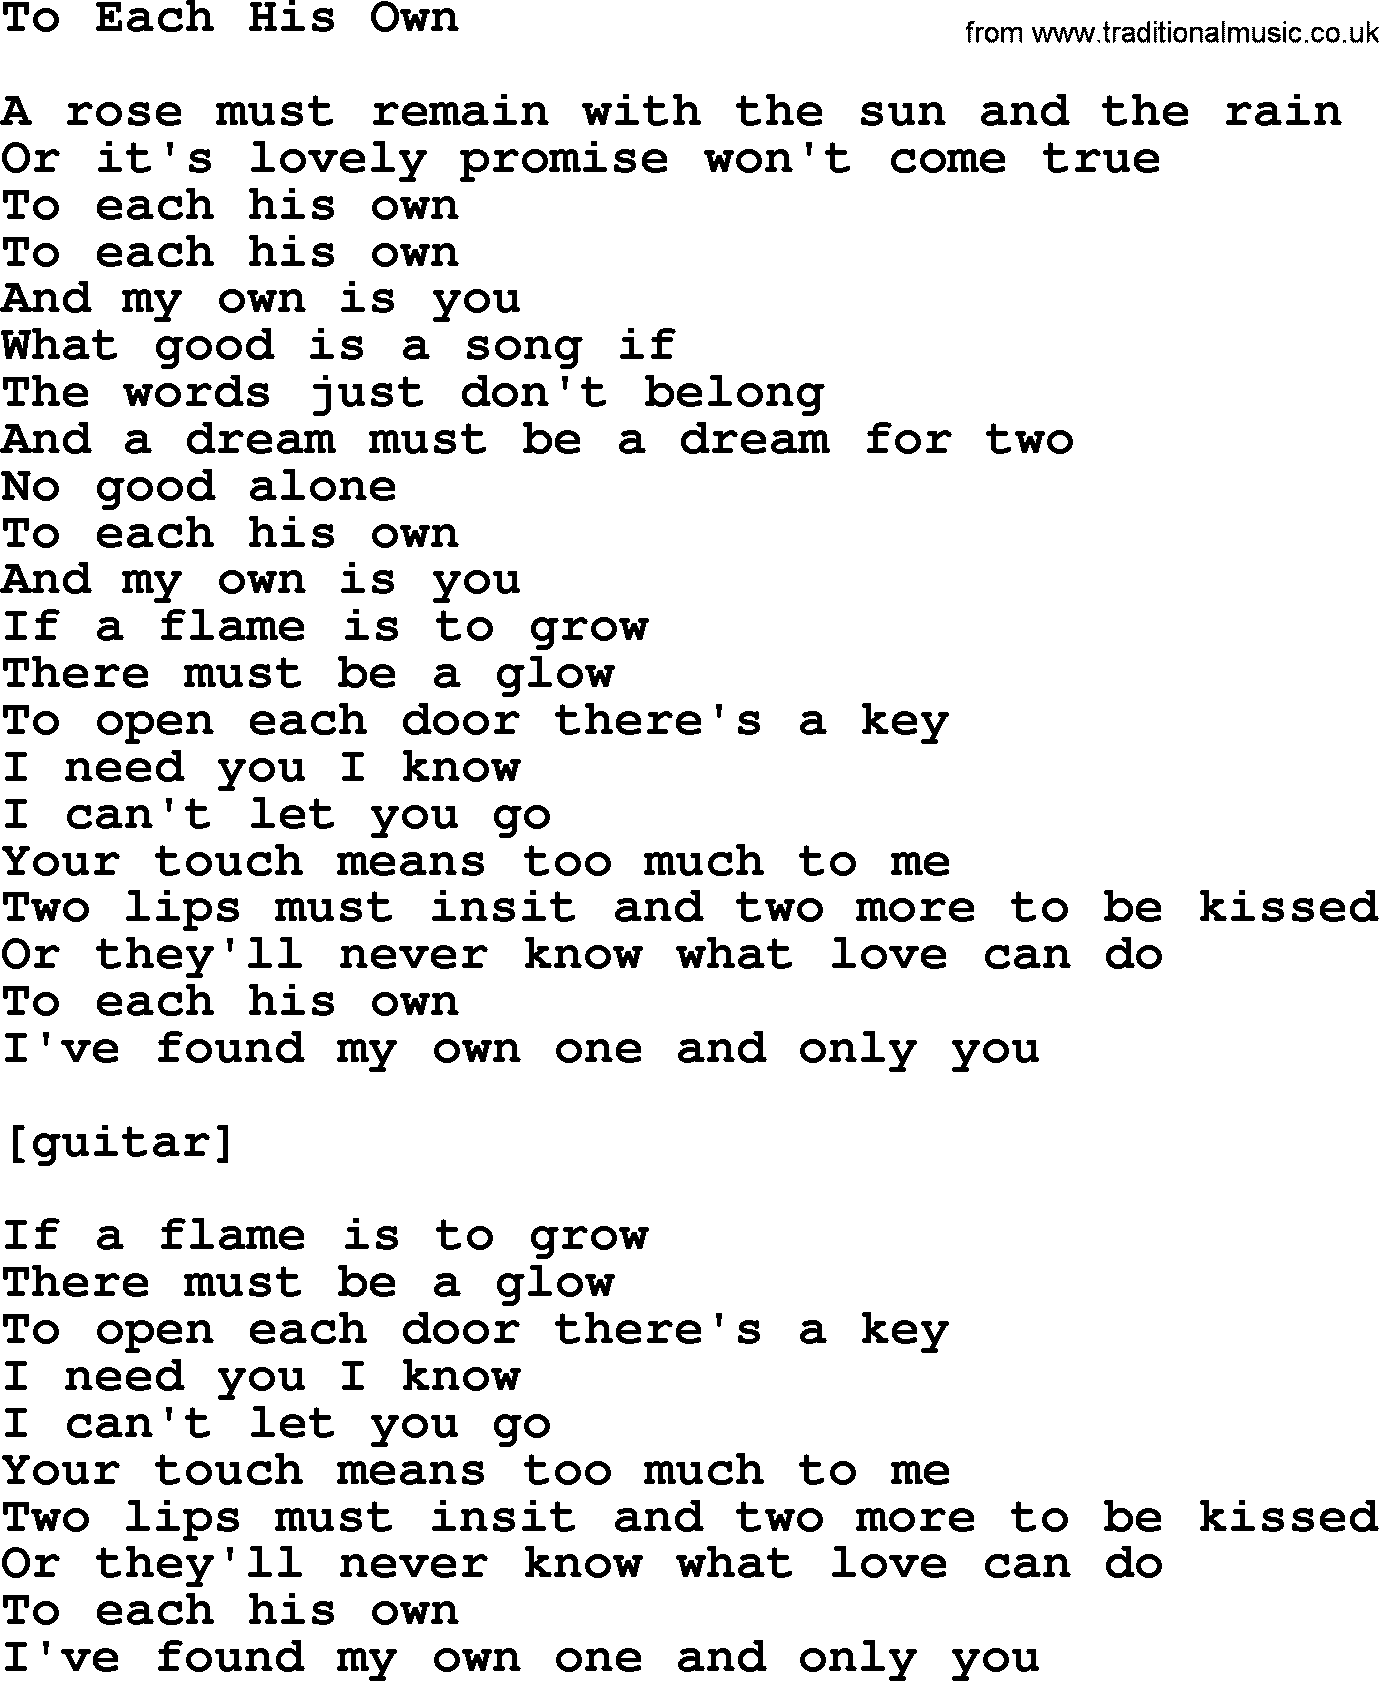 Willie Nelson song: To Each His Own lyrics